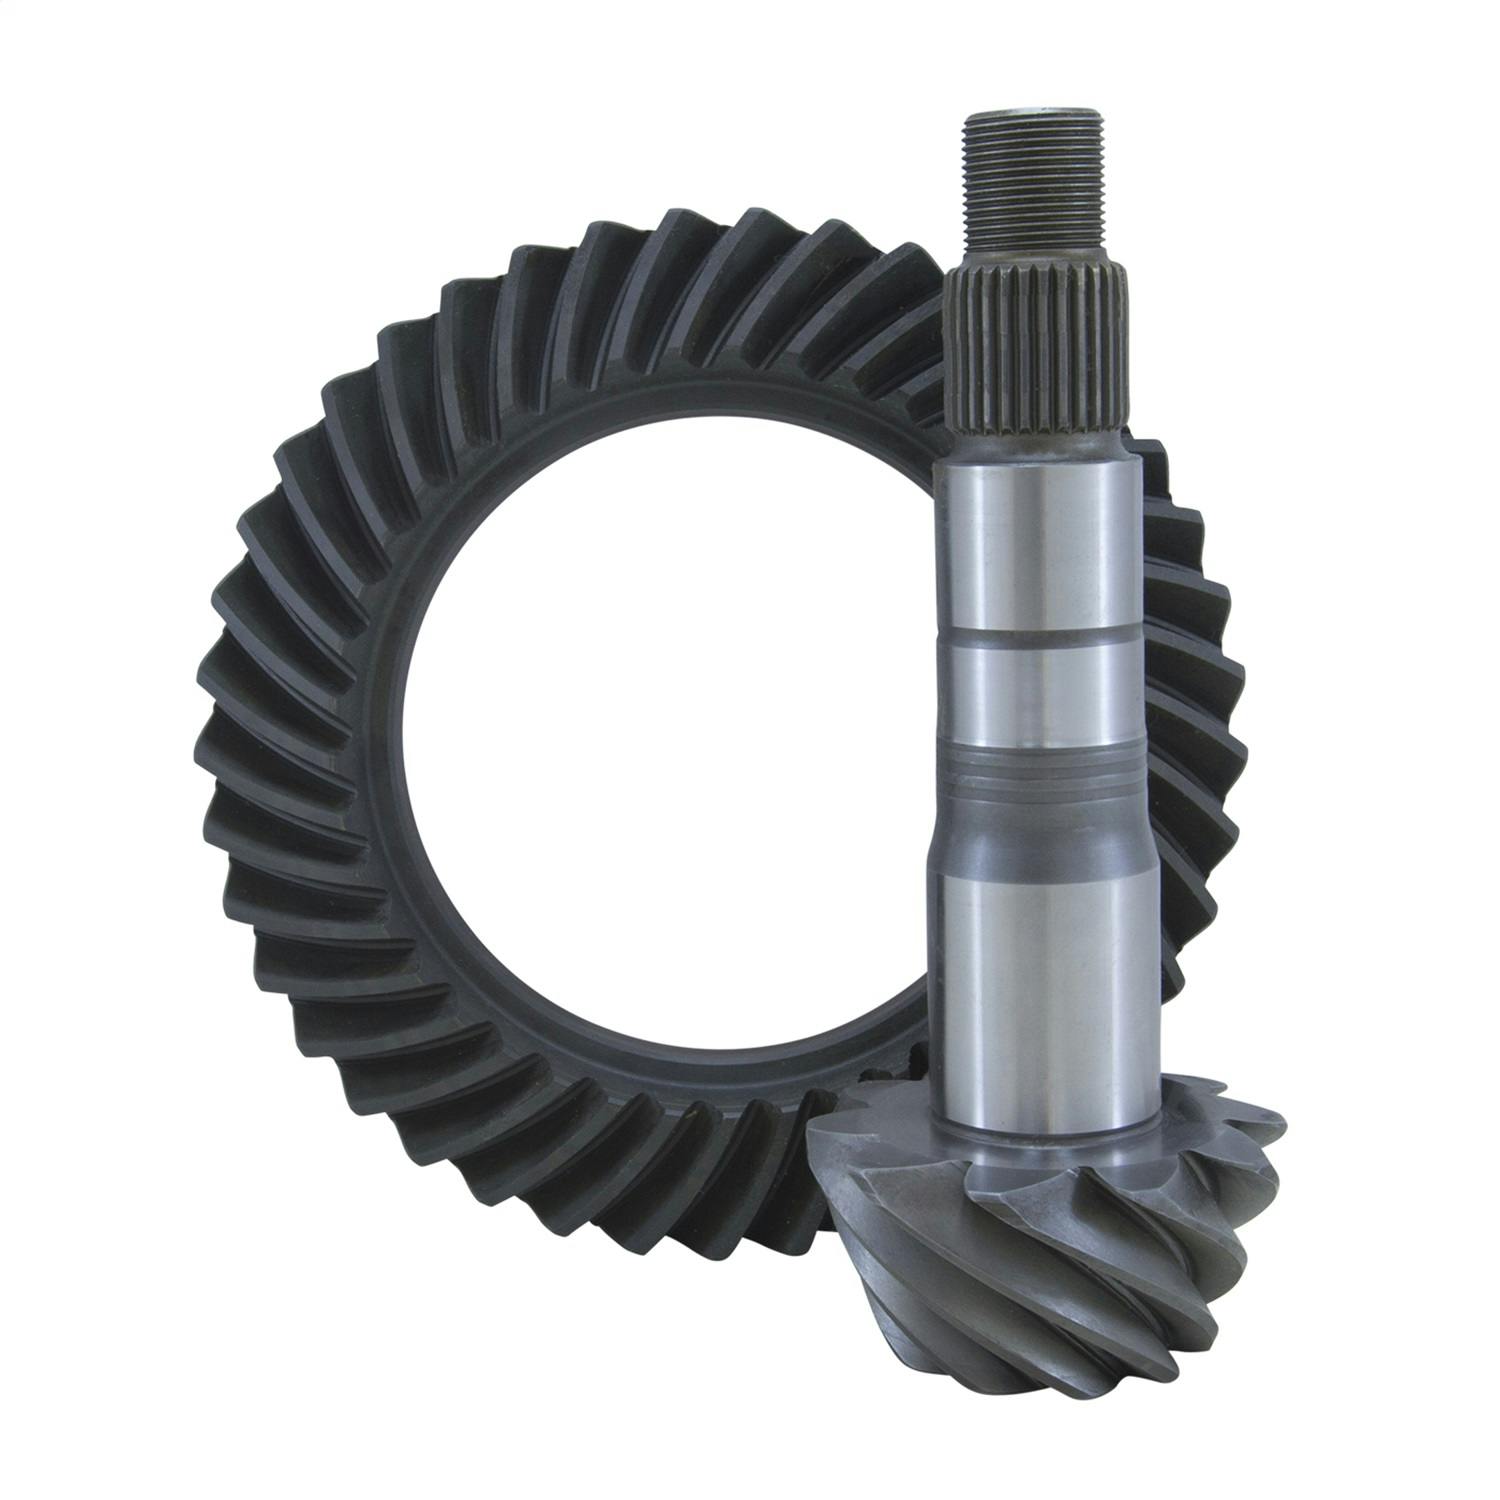 USA Standard Gear ZG T100-456 Ring And Pinion